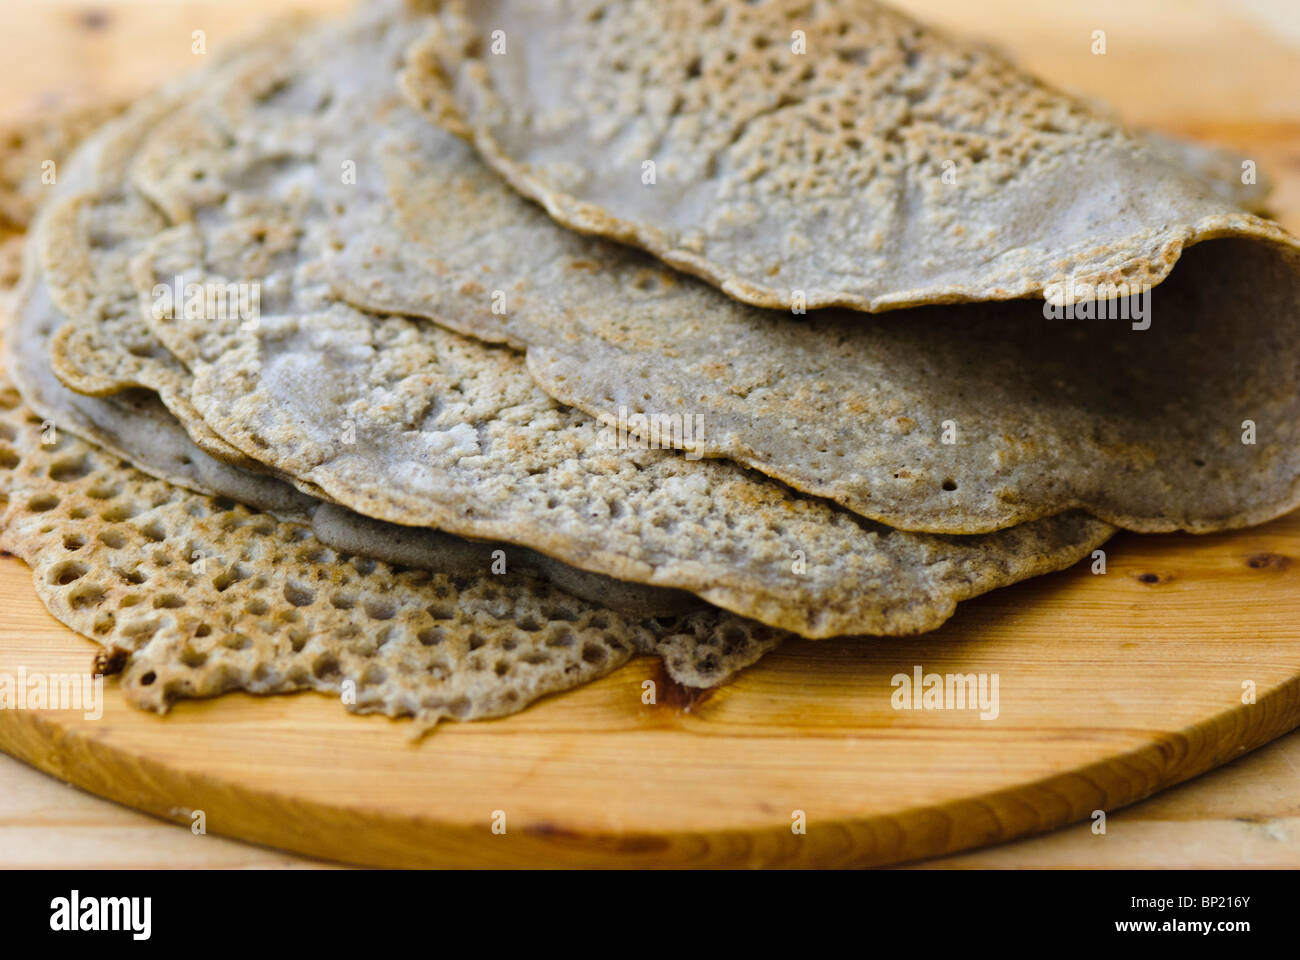 Bread wraps made of buckwheat flour, salt, olive oil and water. Gluten free. Stock Photo